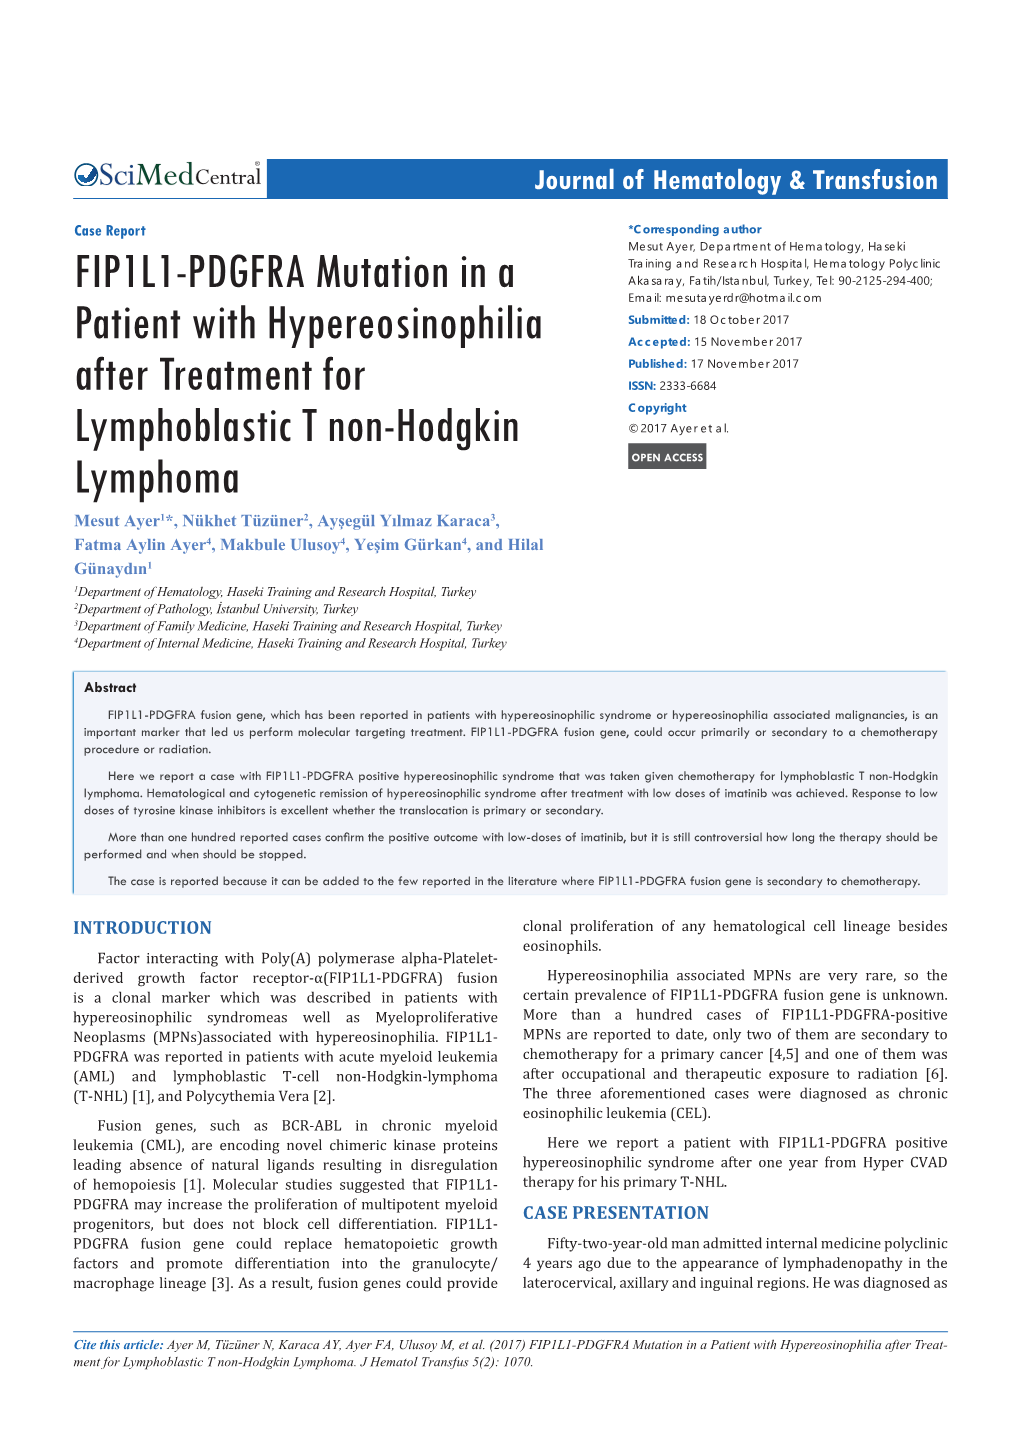 FIP1L1-PDGFRA Mutation in a Patient with Hypereosinophilia After Treatment for Lymphoblastic T Non-Hodgkin Lymphoma